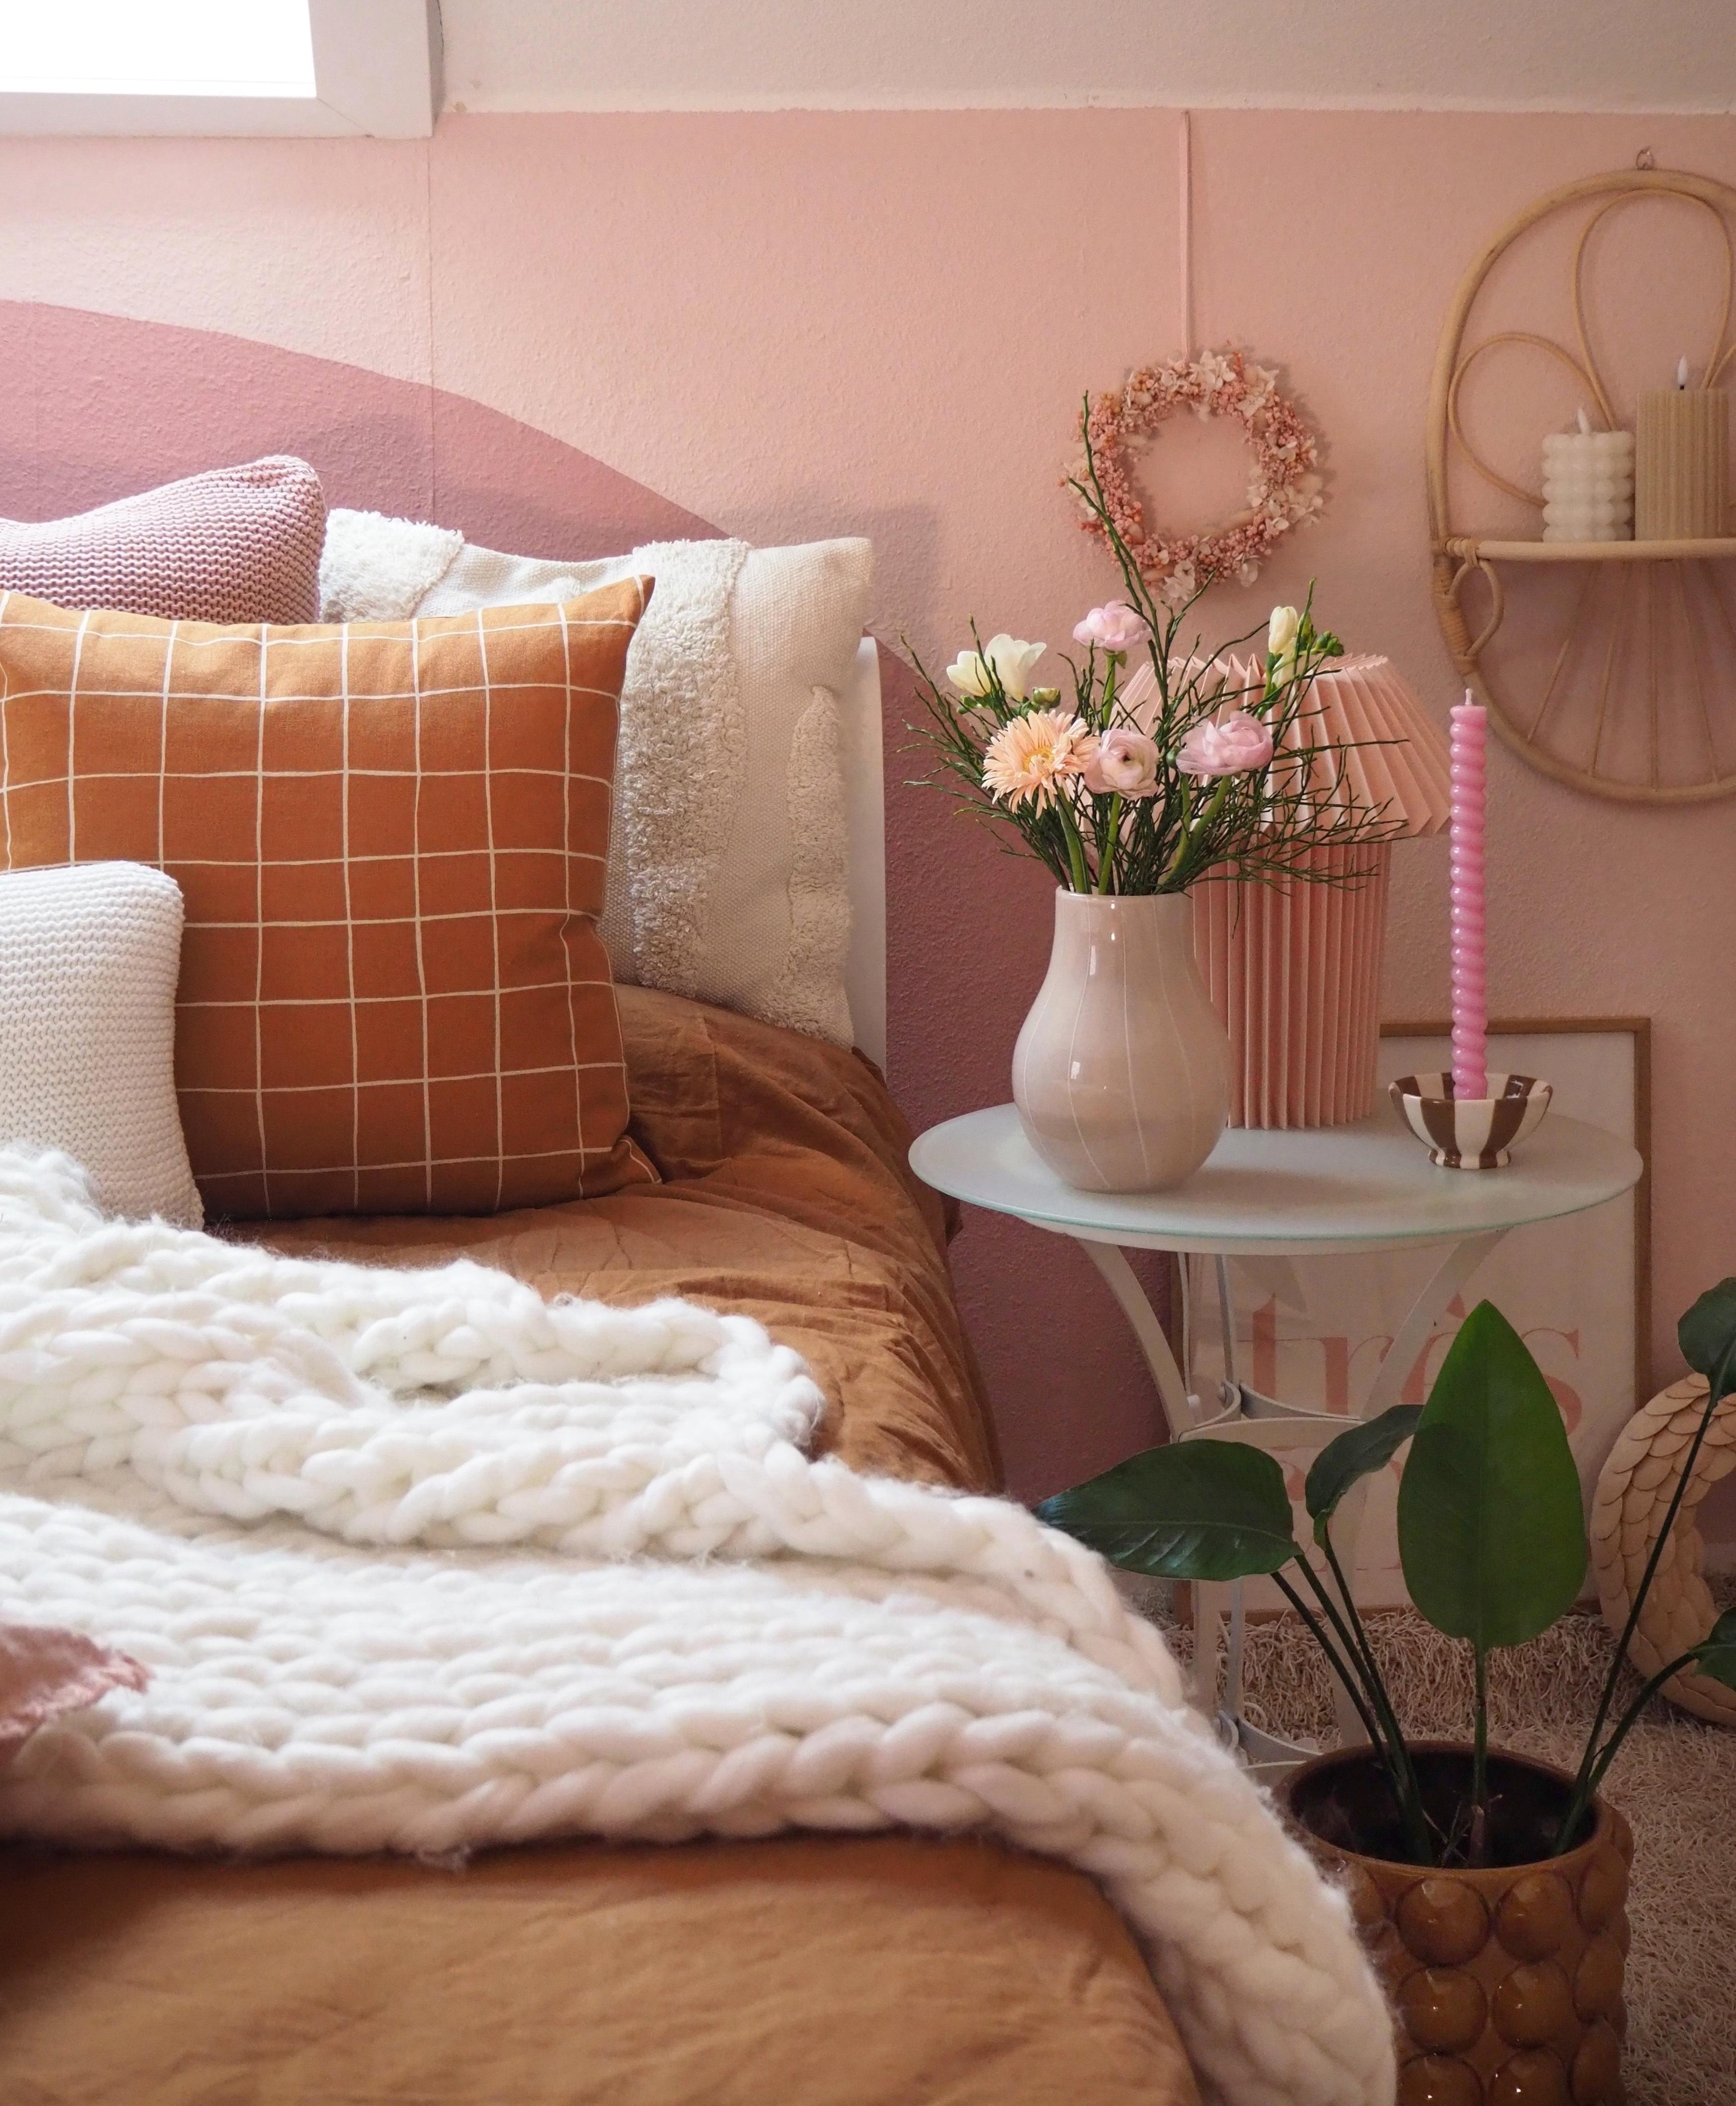 SUNDAY #cozyhome #bedroom #schlafzimmer #colourfulhome #dekoliebe #blumenliebe #farbenliebe #rosa